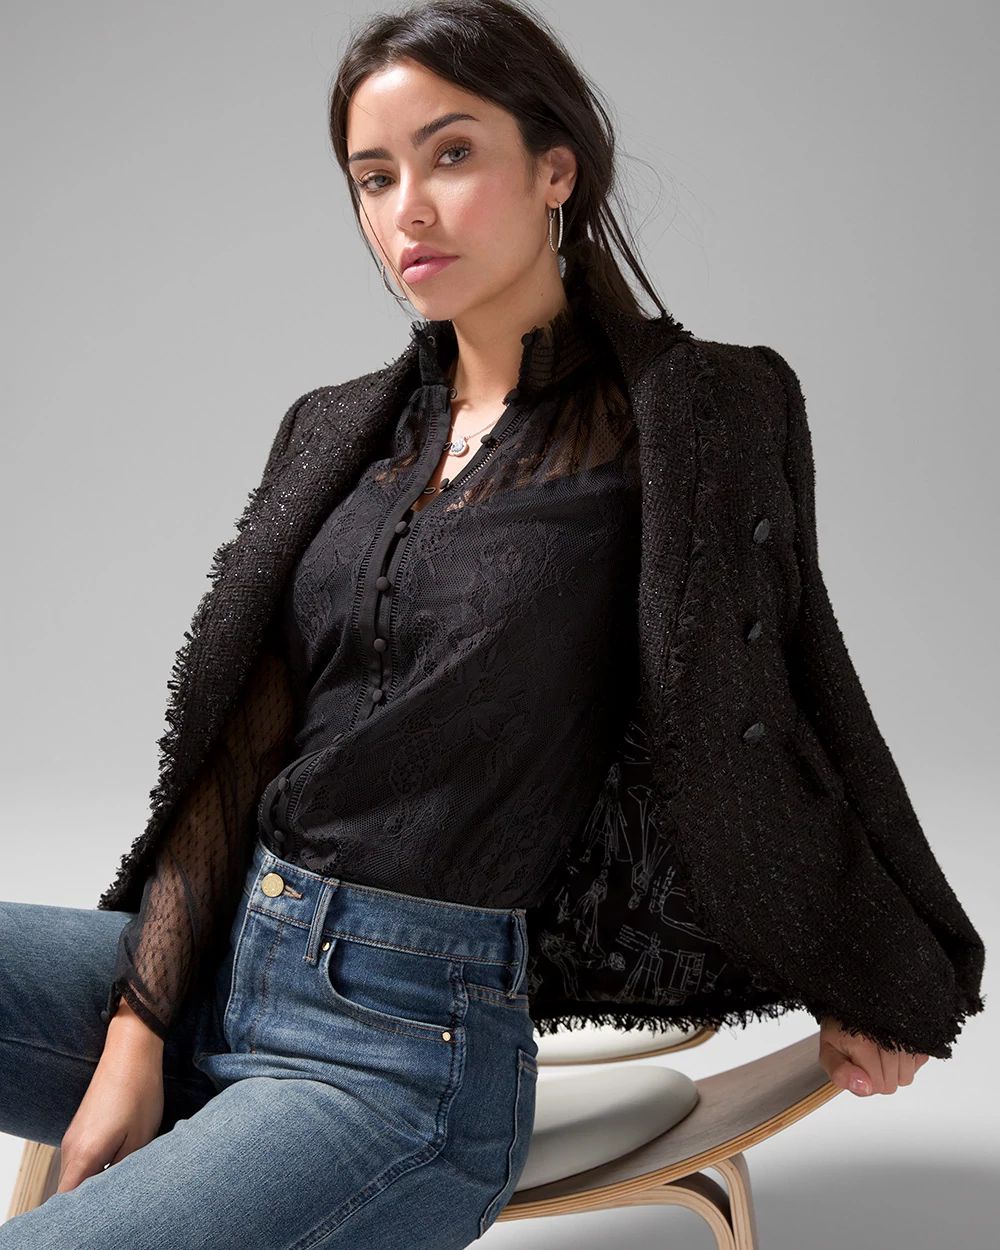 Tulle Mixed Lace Blouse click to view larger image.